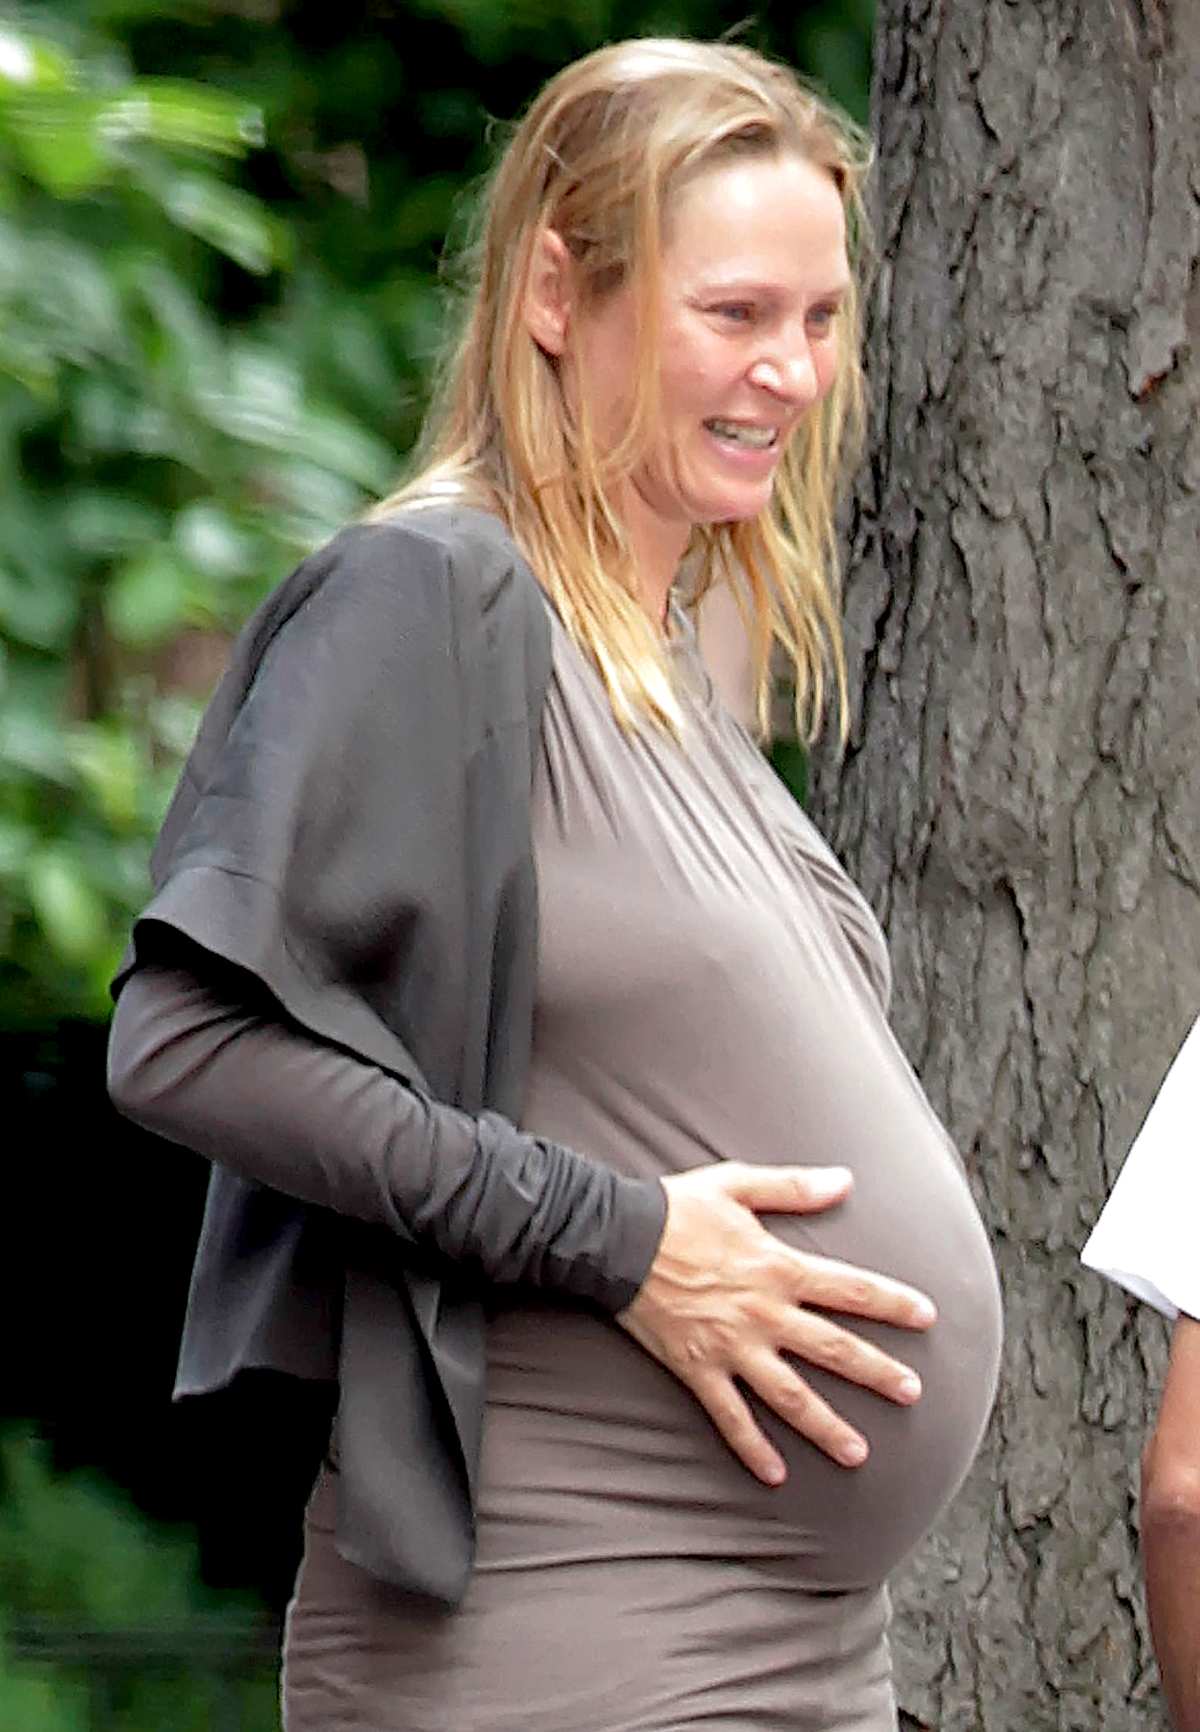 Pregnant Babe Sex Mom - Celebrities Over 40 and Pregnant: Baby Bump Pics